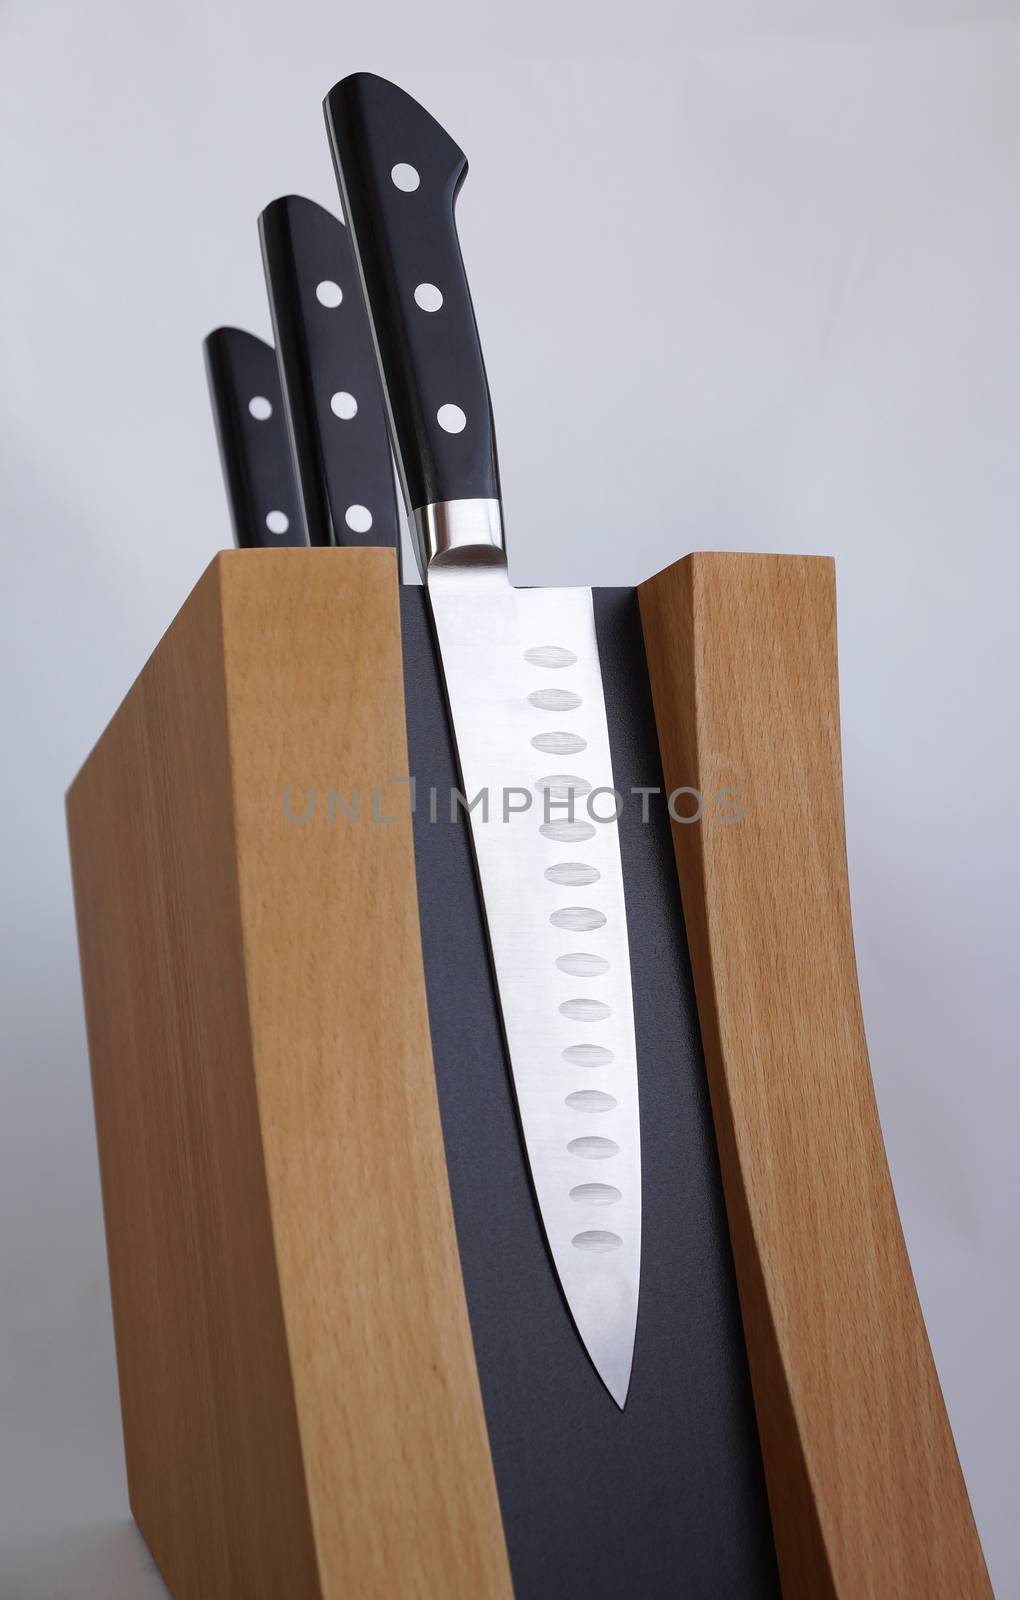 Set of knives for kitchen on a magnetic support